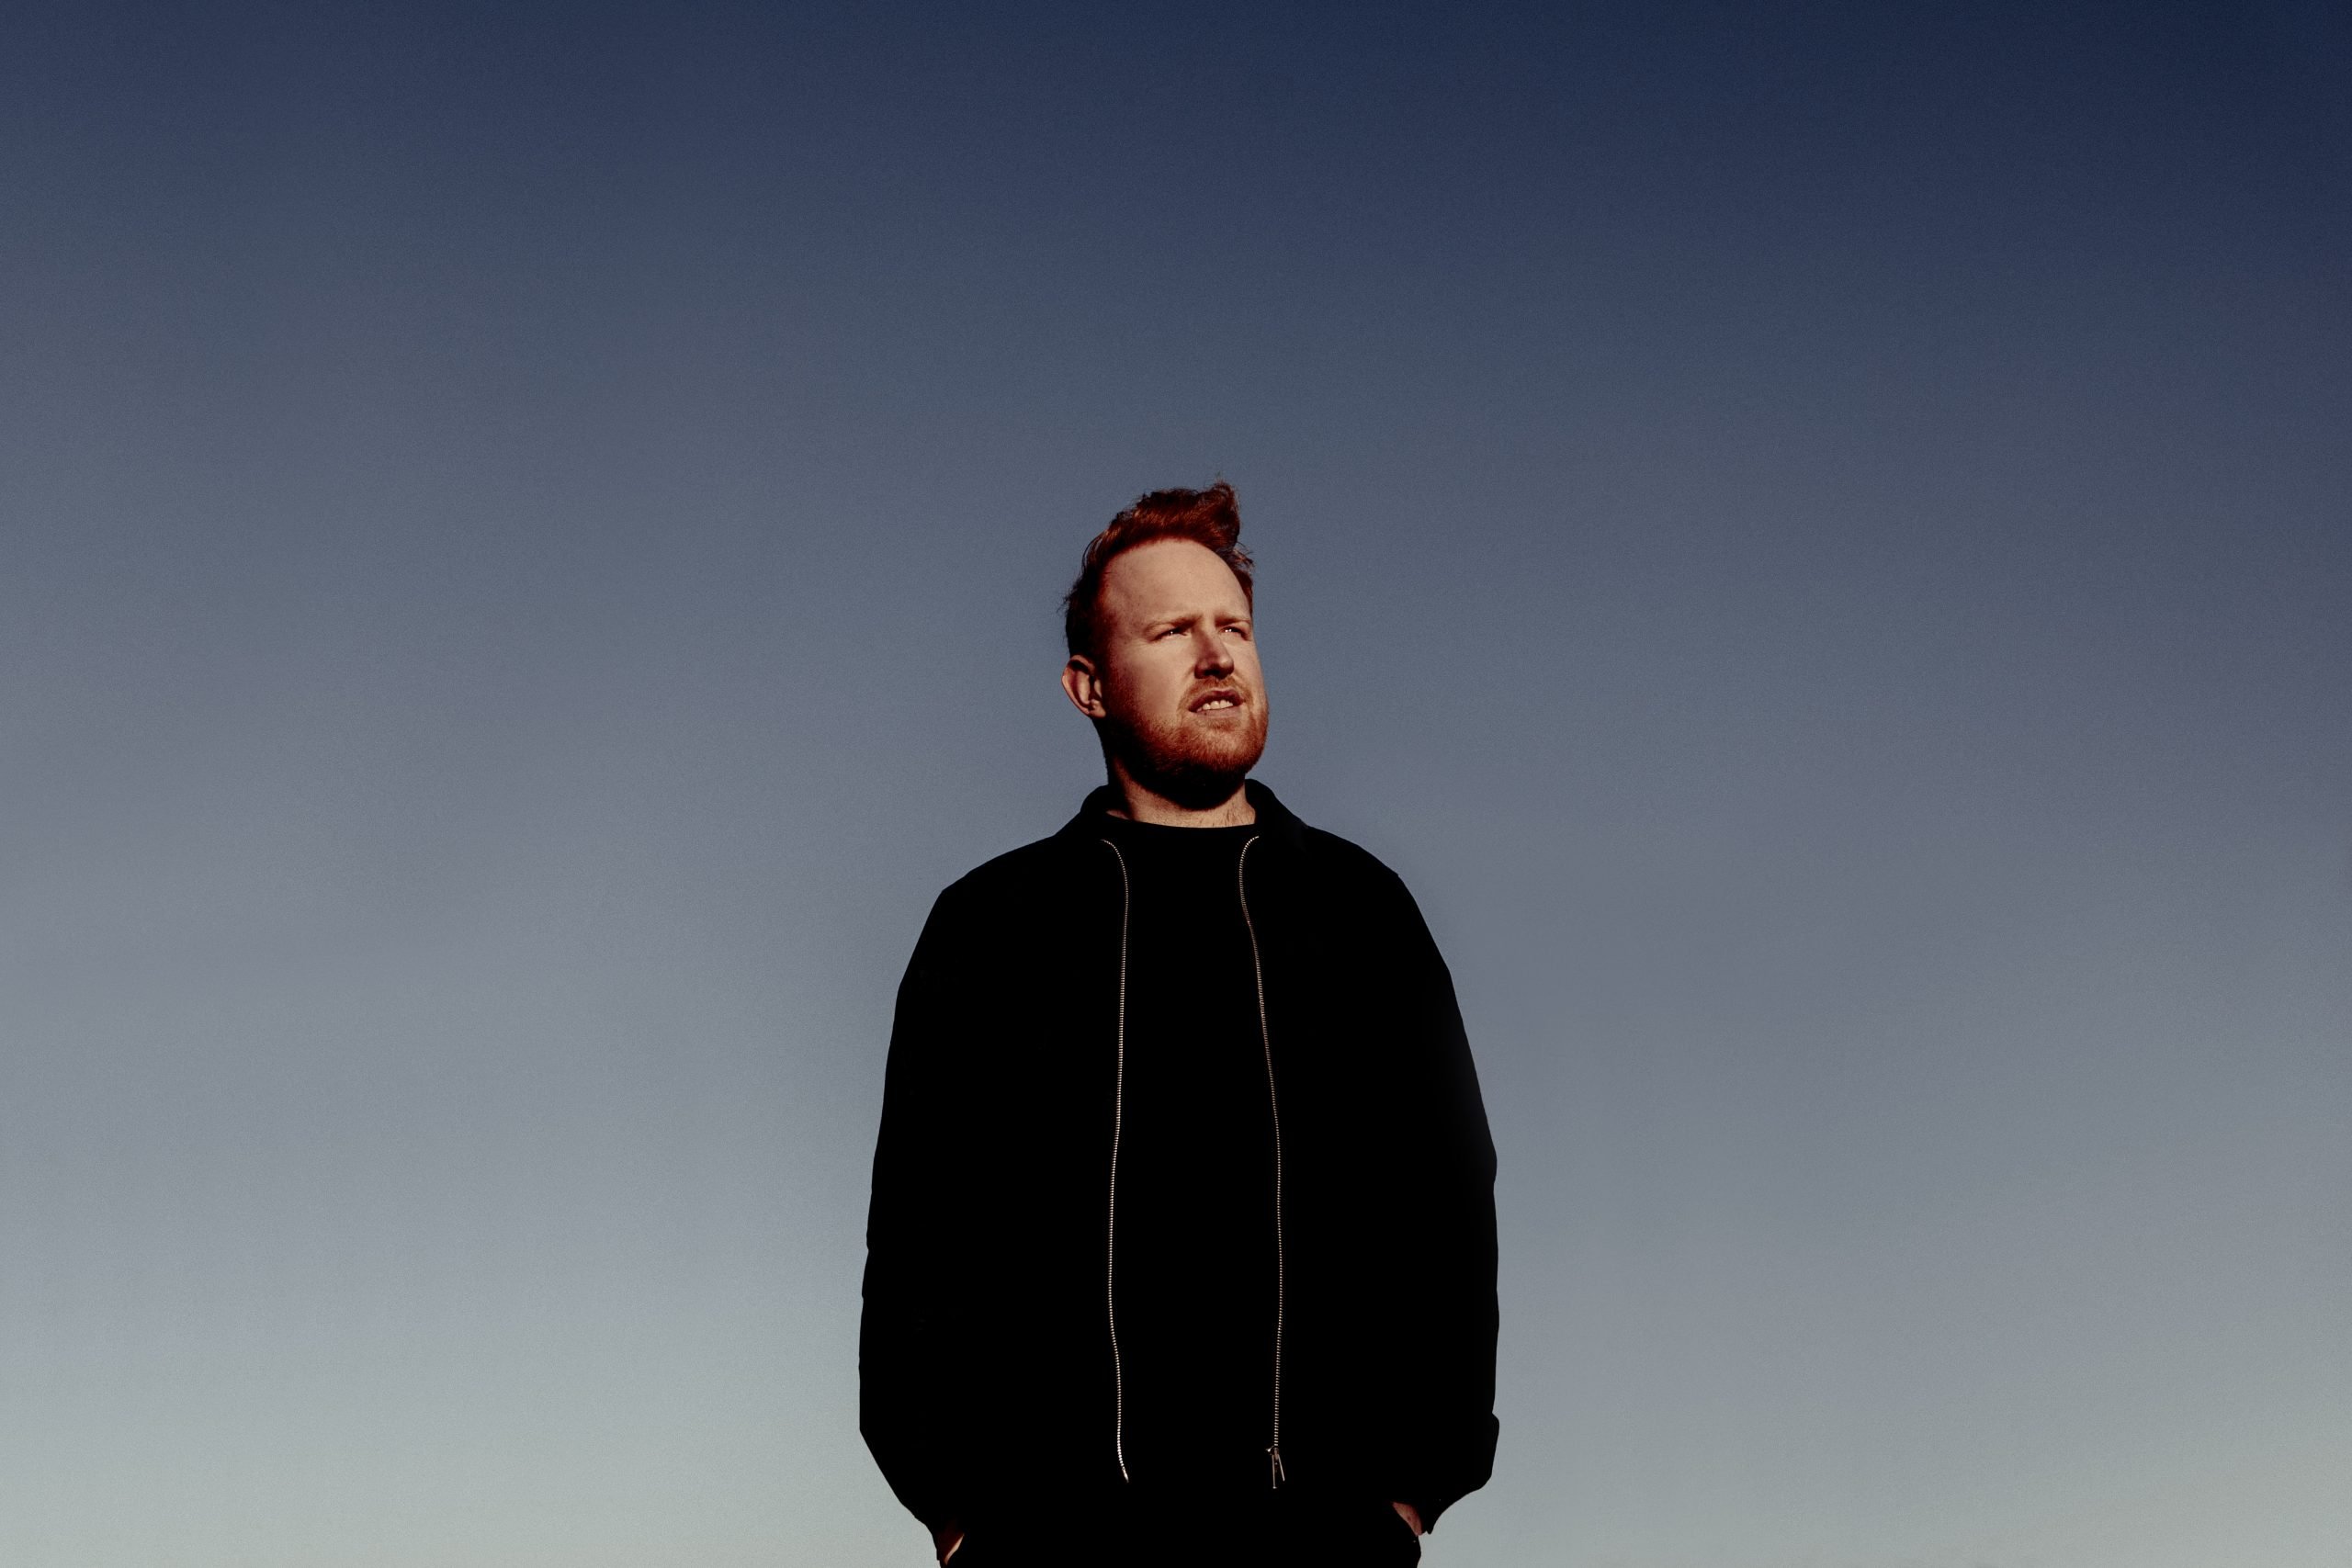 Gavin James King Johns Castle Gig as part of his 2022 tour promises to be an unforgettable event.